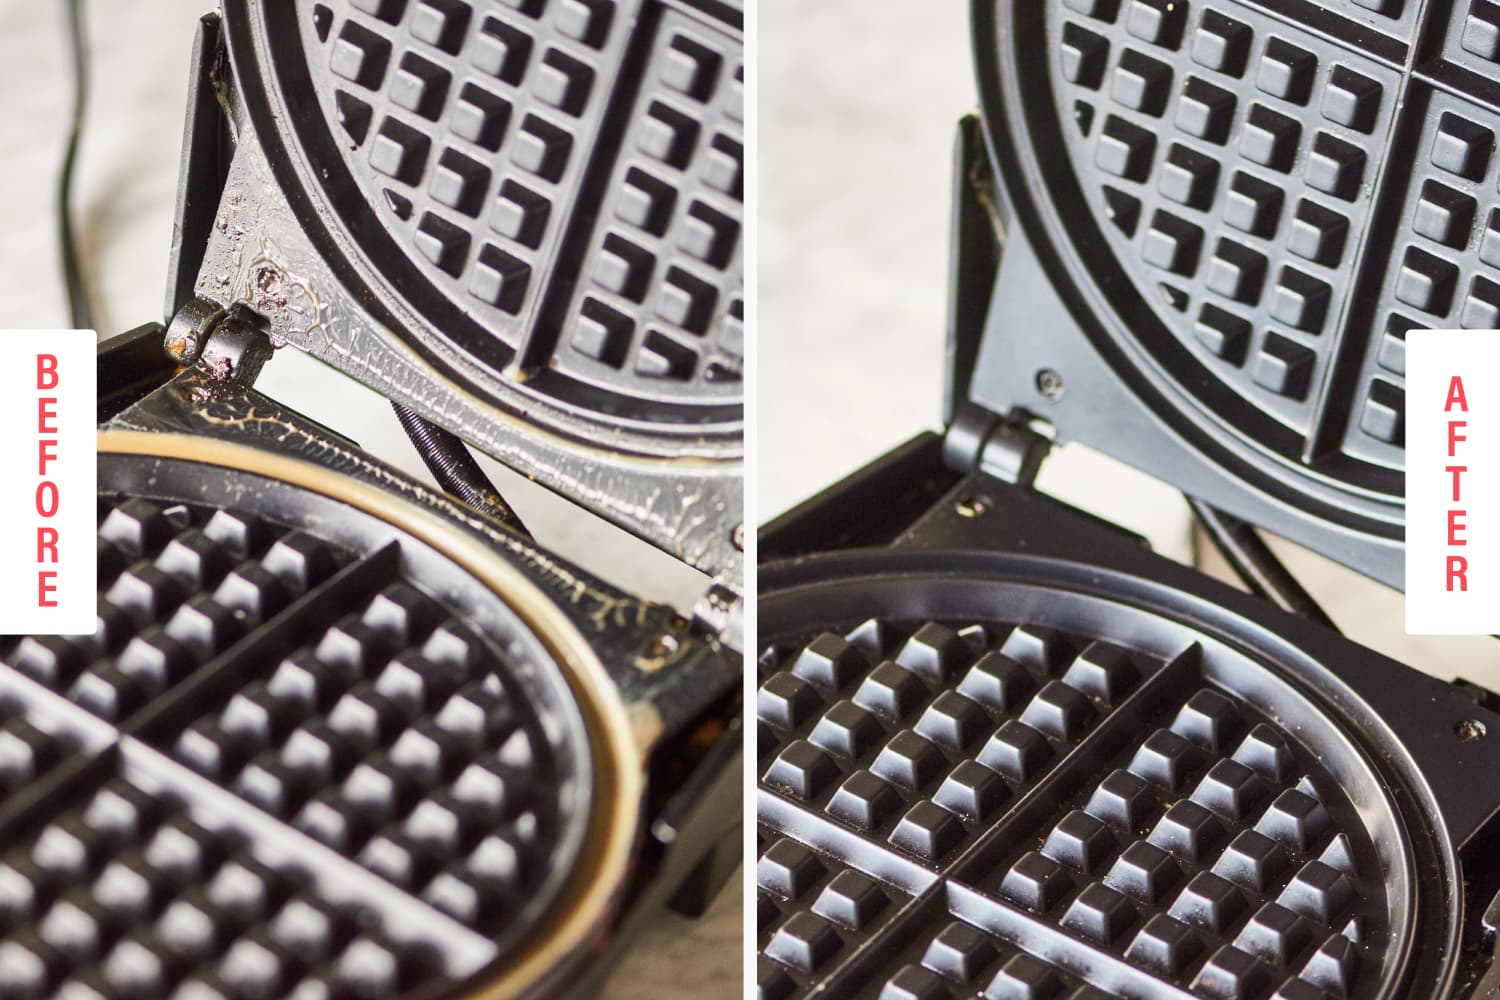 How to Clean a Waffle Iron